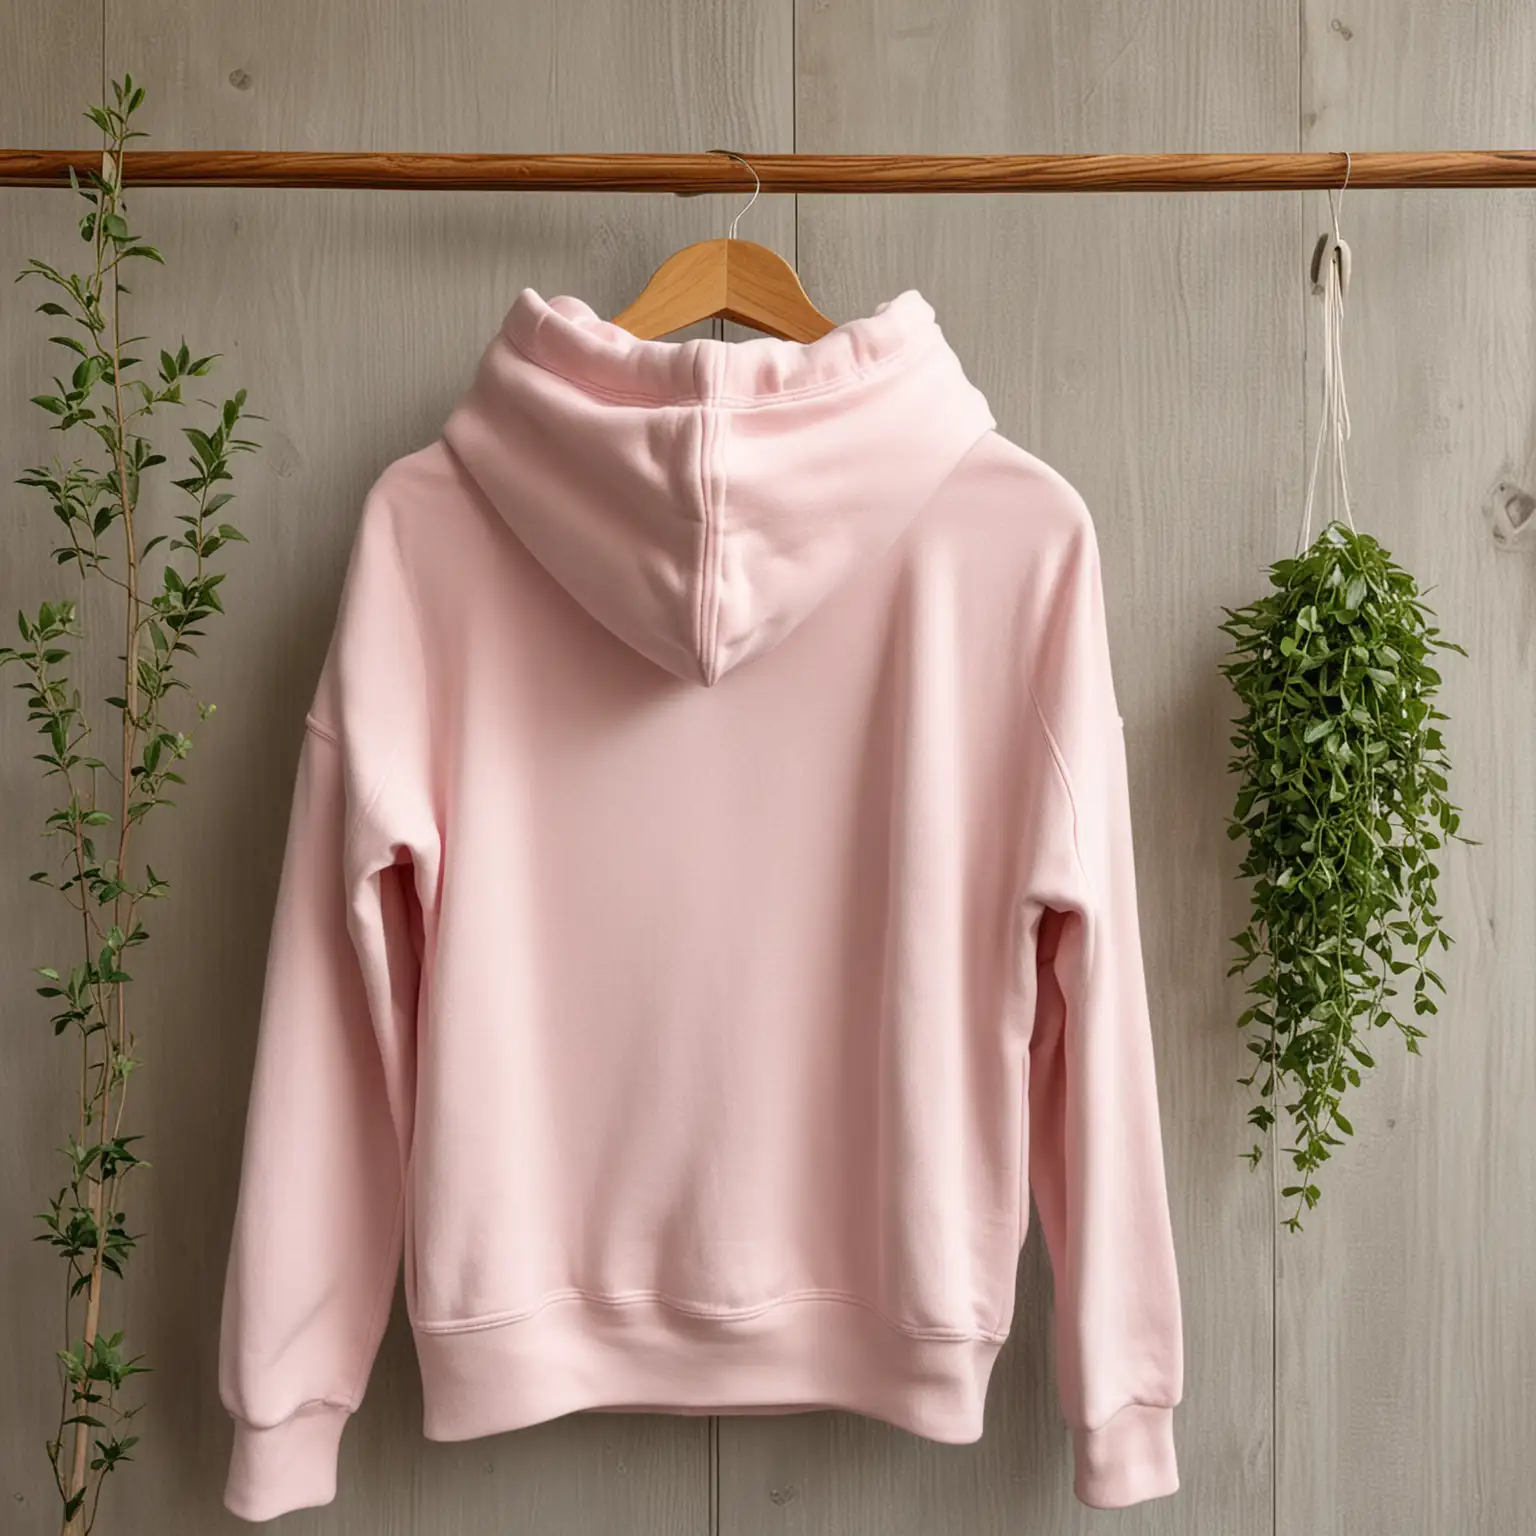 Light Pink Hoodie Hanging on Wooden Pole with Plant